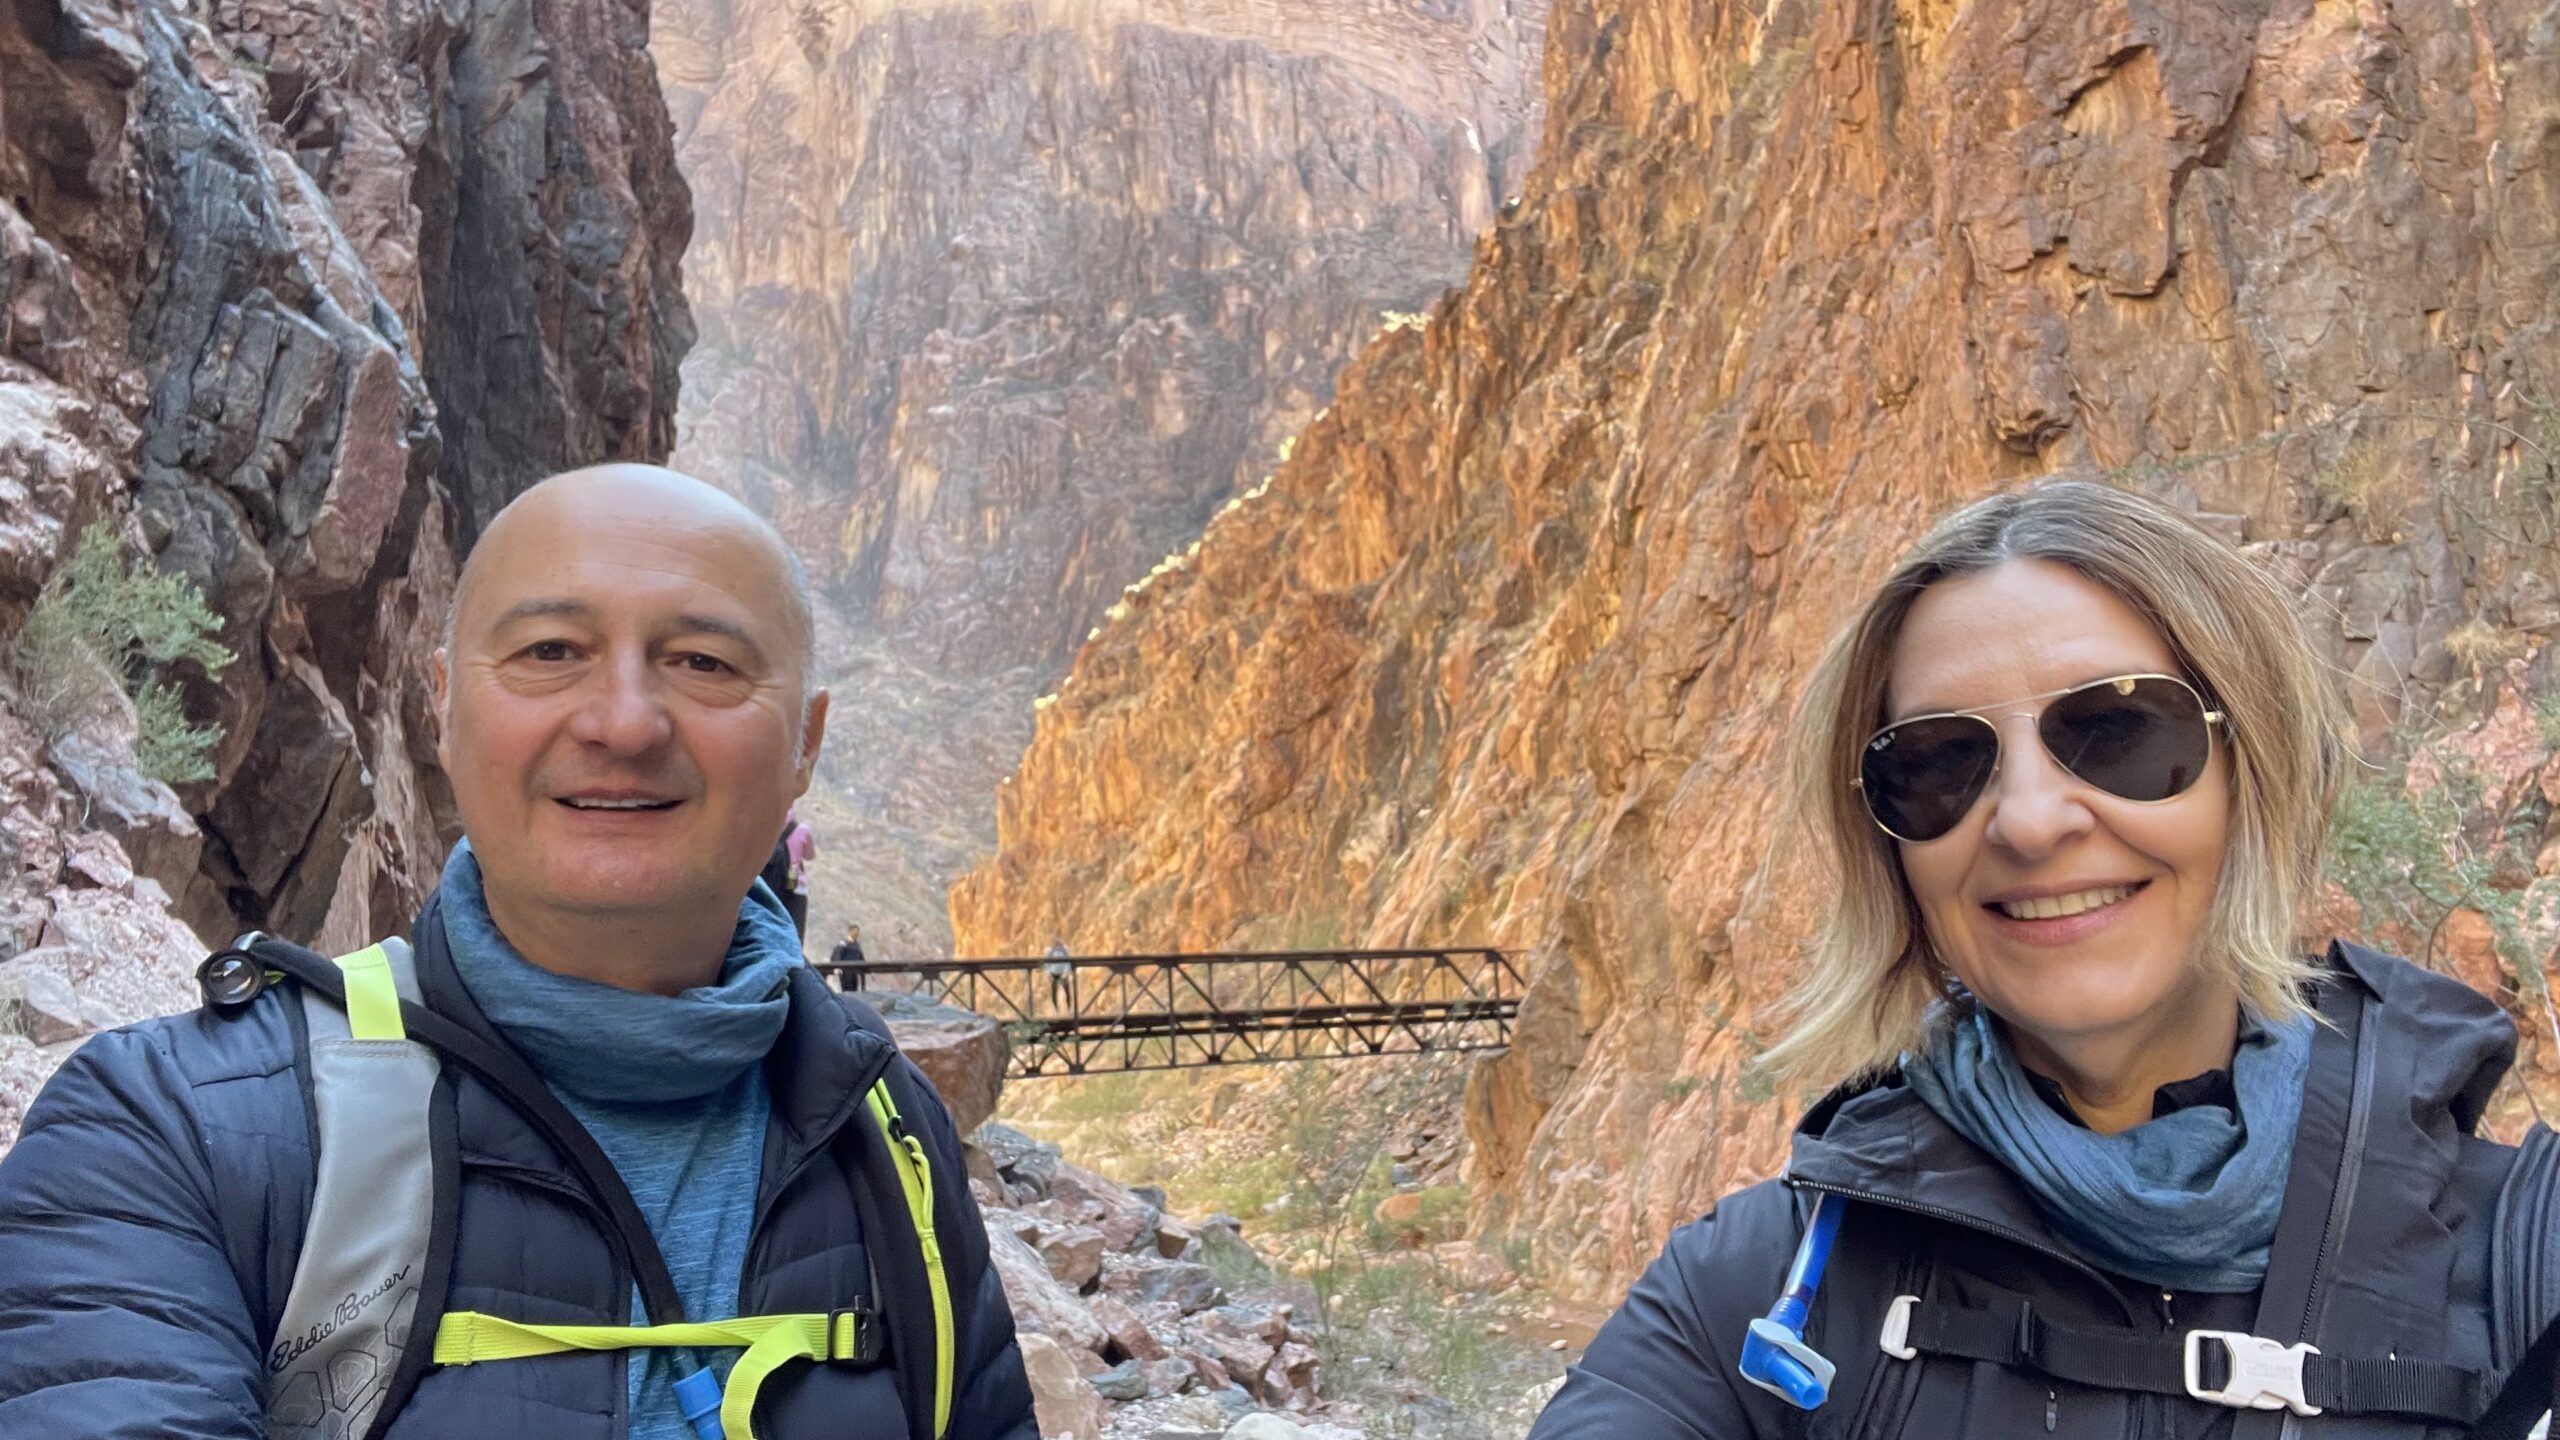 Grand Canyon Rim-to-Rim Hike: How to train. What to bring.